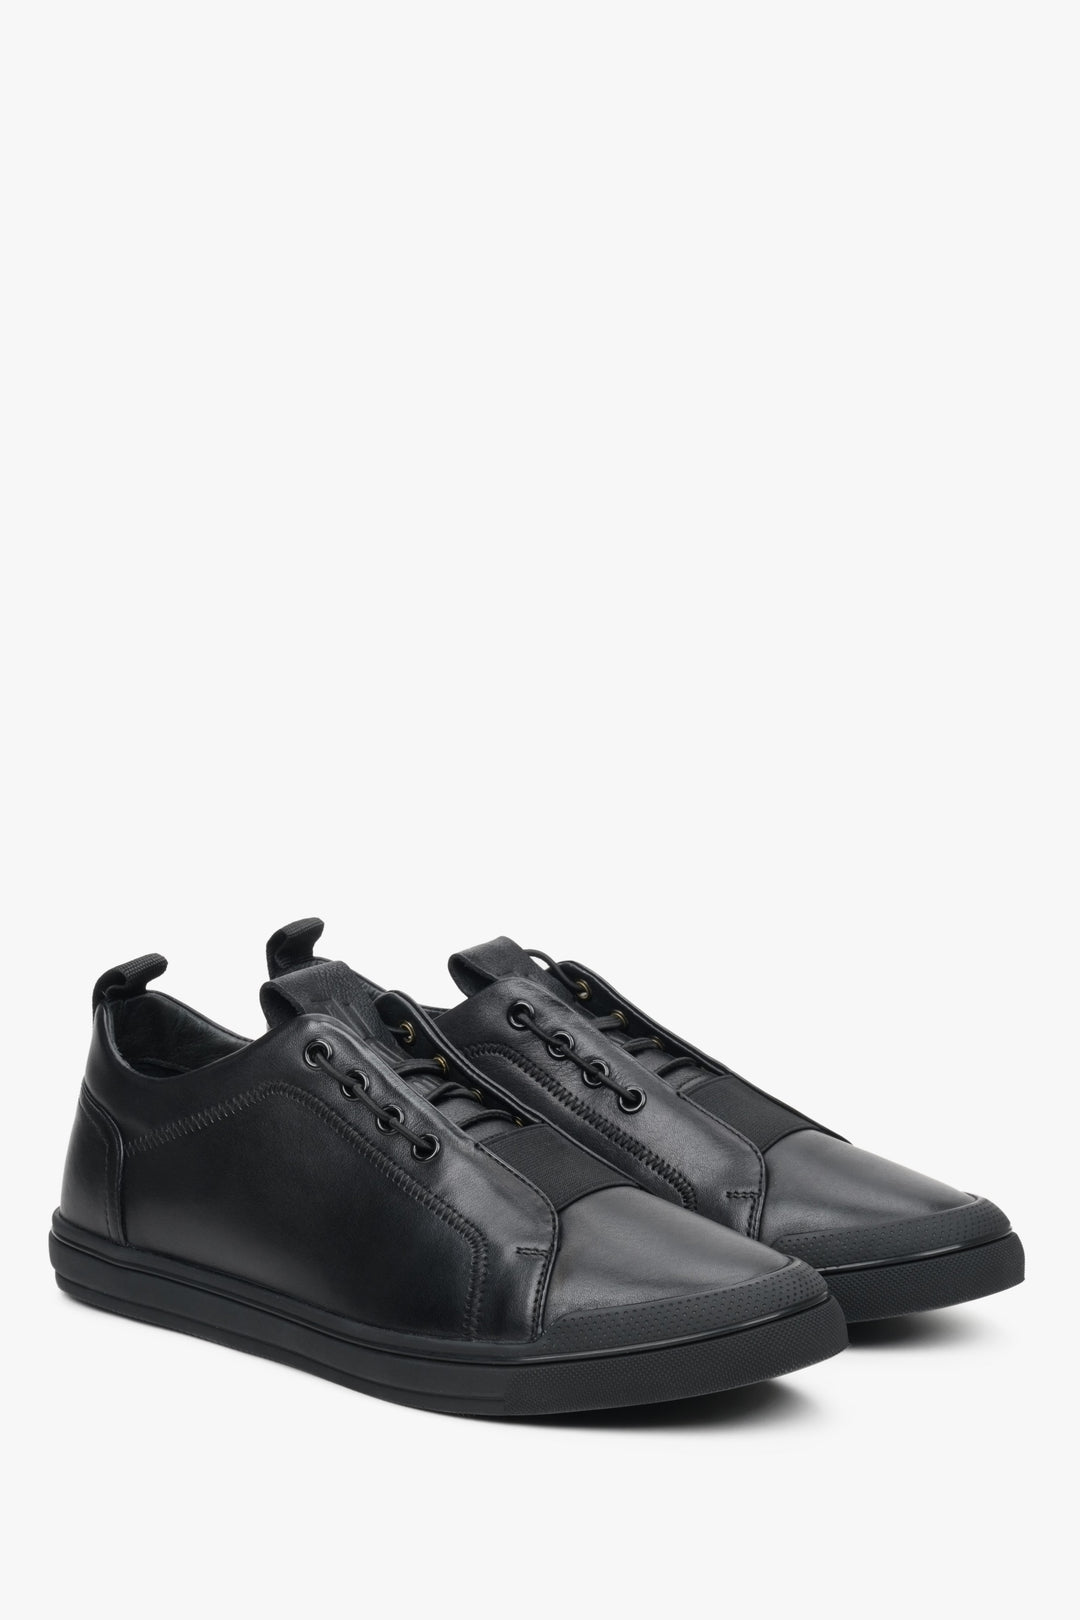 Men's black sneakers made of genuine leather by ES 8 - presentation of the toe cap and side line.